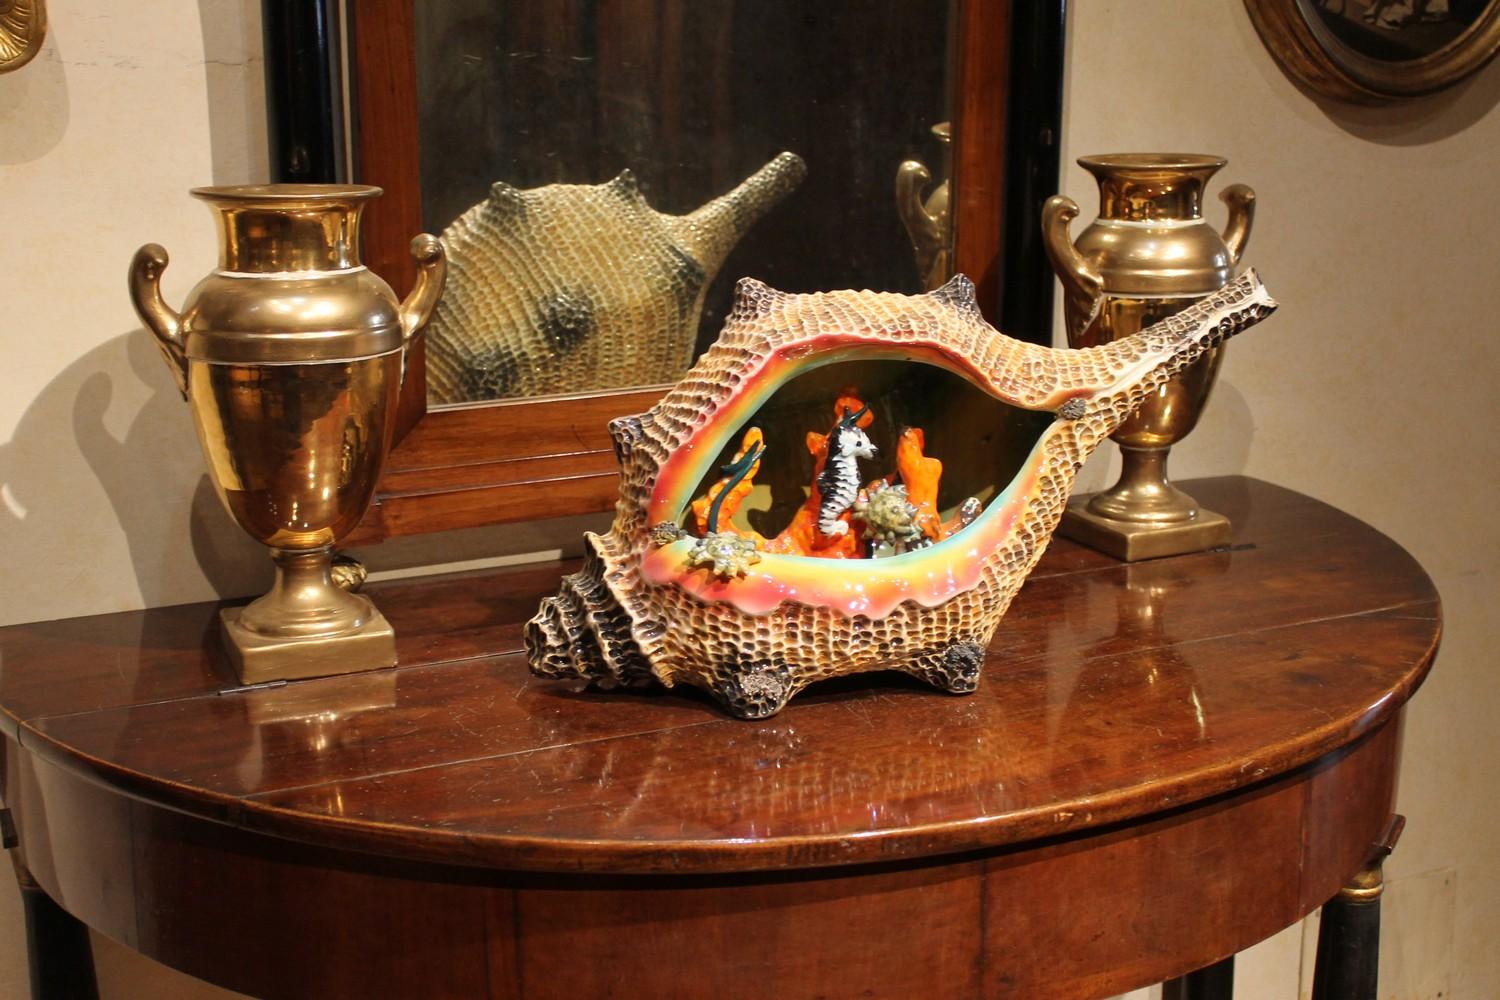 There is all the Italian artisan mastery in this exceptional Mid-Century Modern open worked large Majolica ornament centerpiece in the form of a long shell enriched with crab, seahorse and red coral perfectly shaped inside it. Looking at this